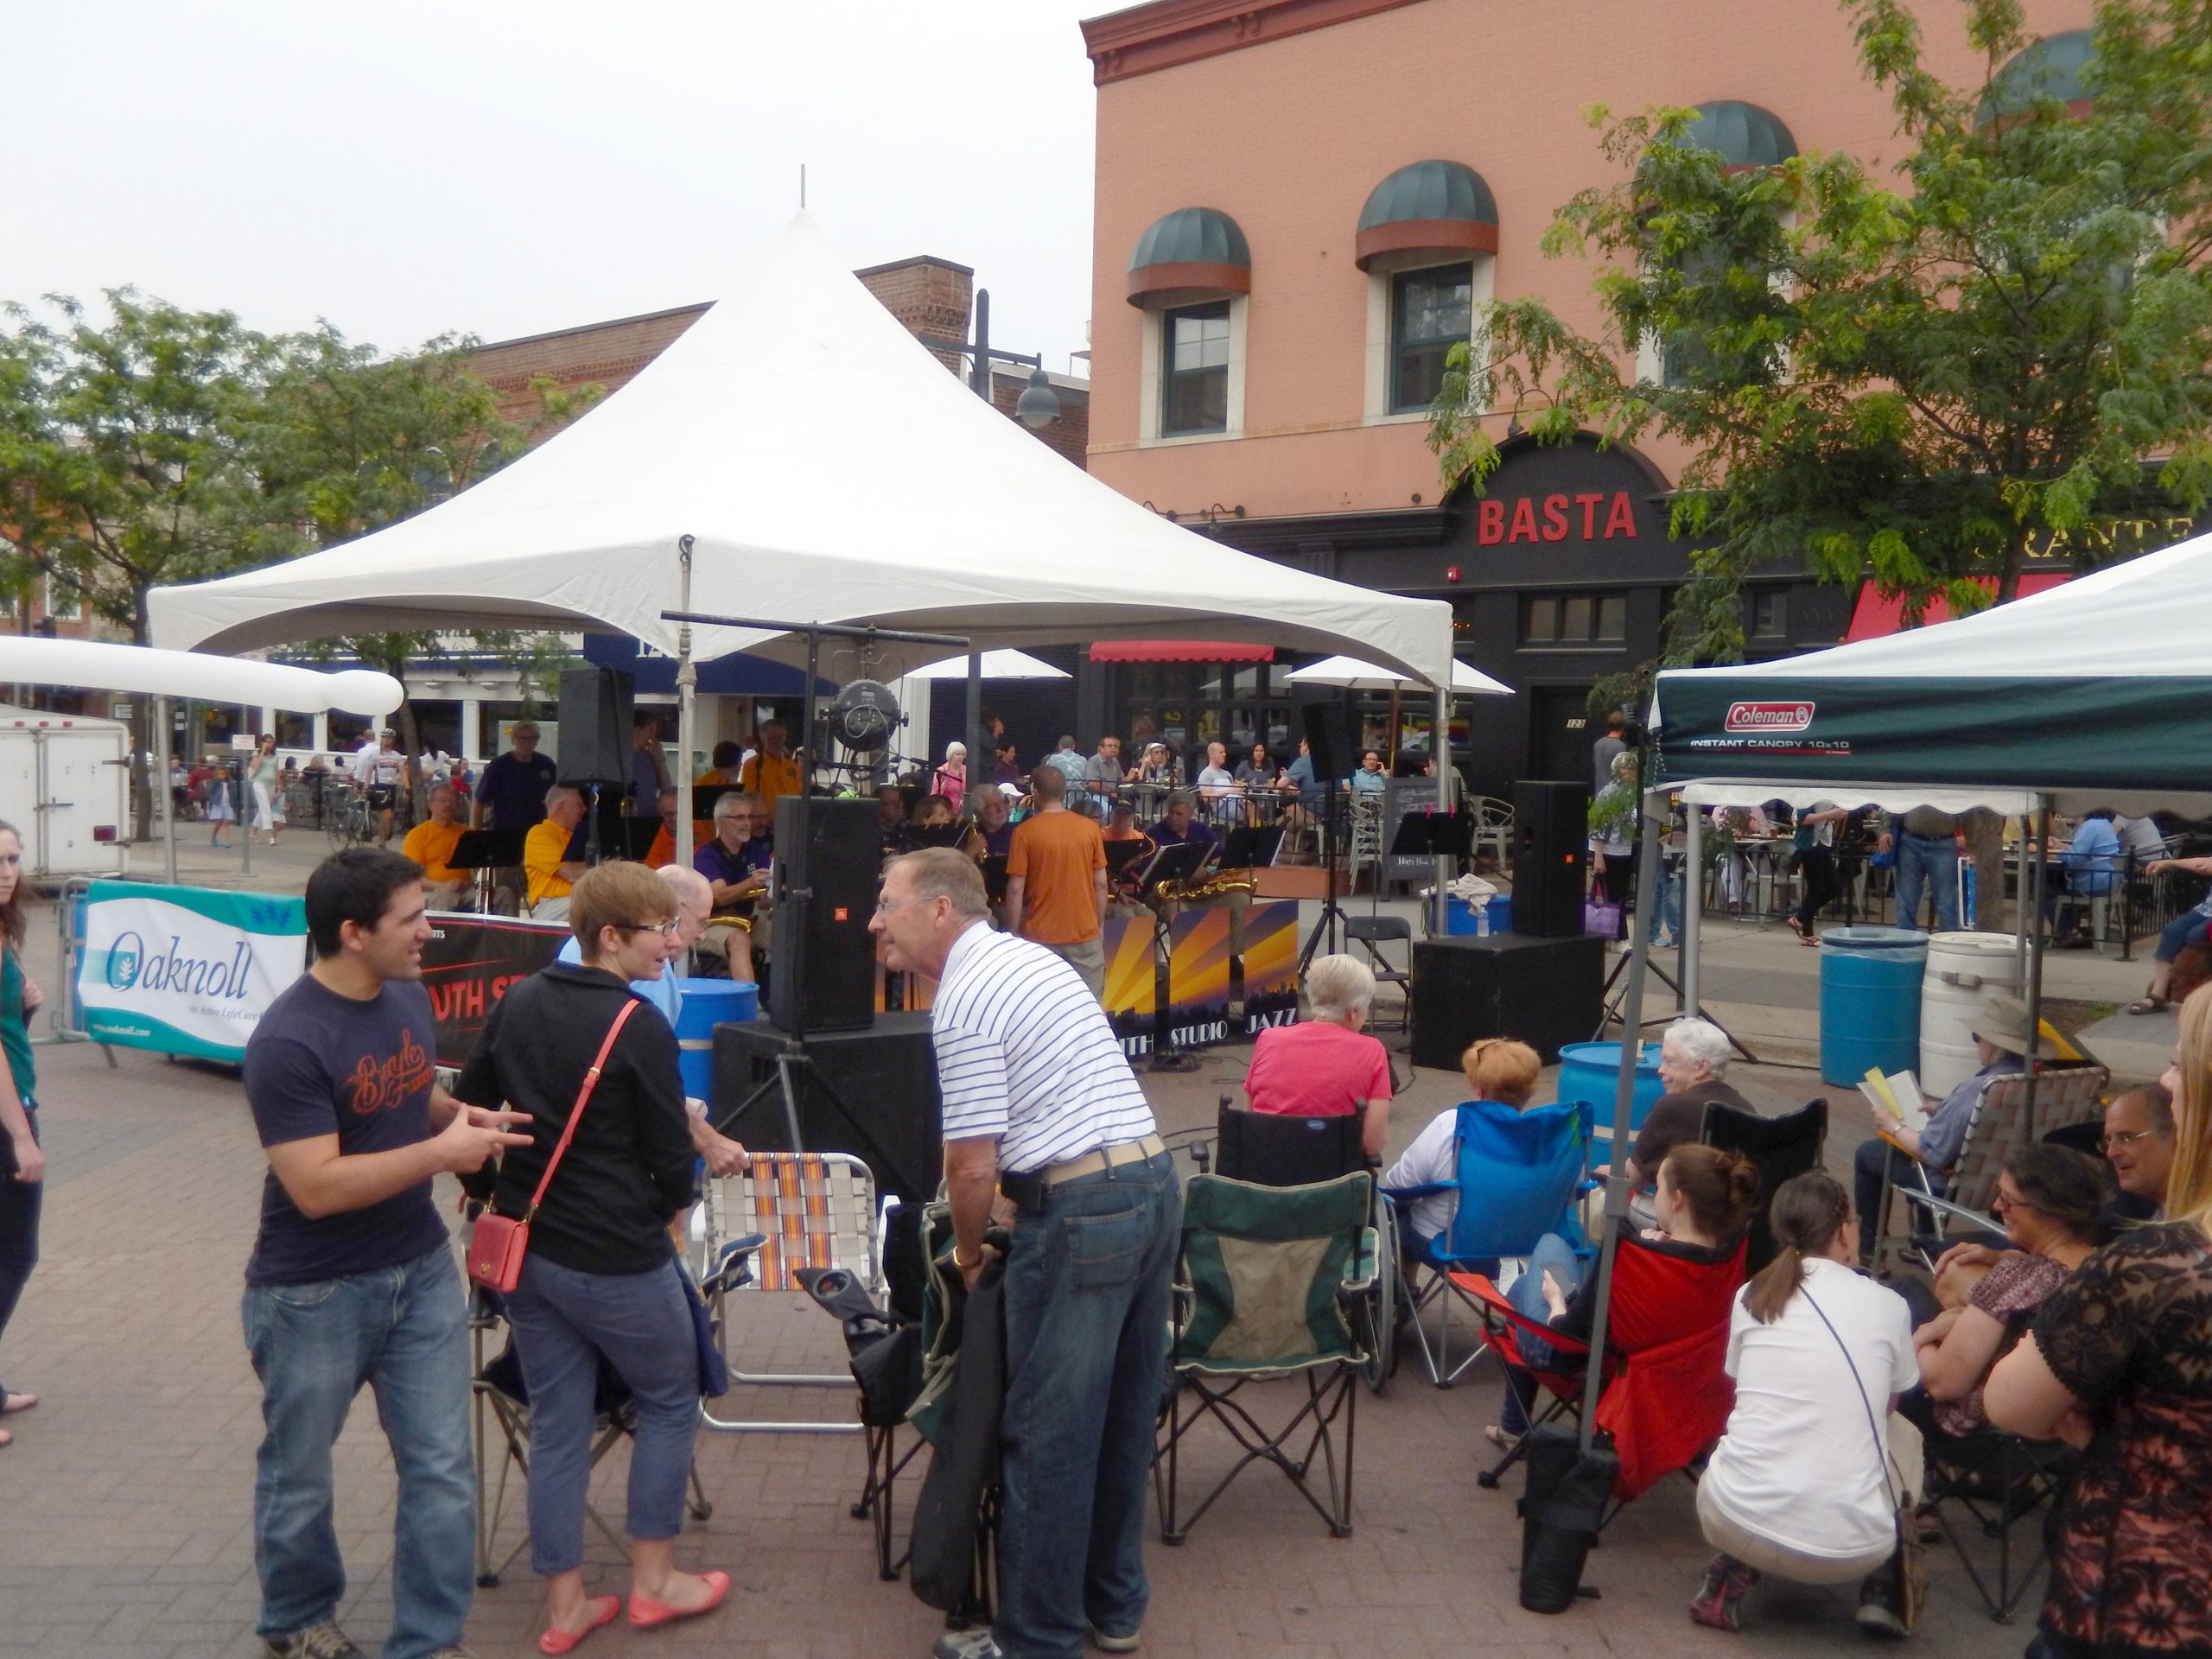 1 of 3 local stages at Iowa City Jazz Fest 2015